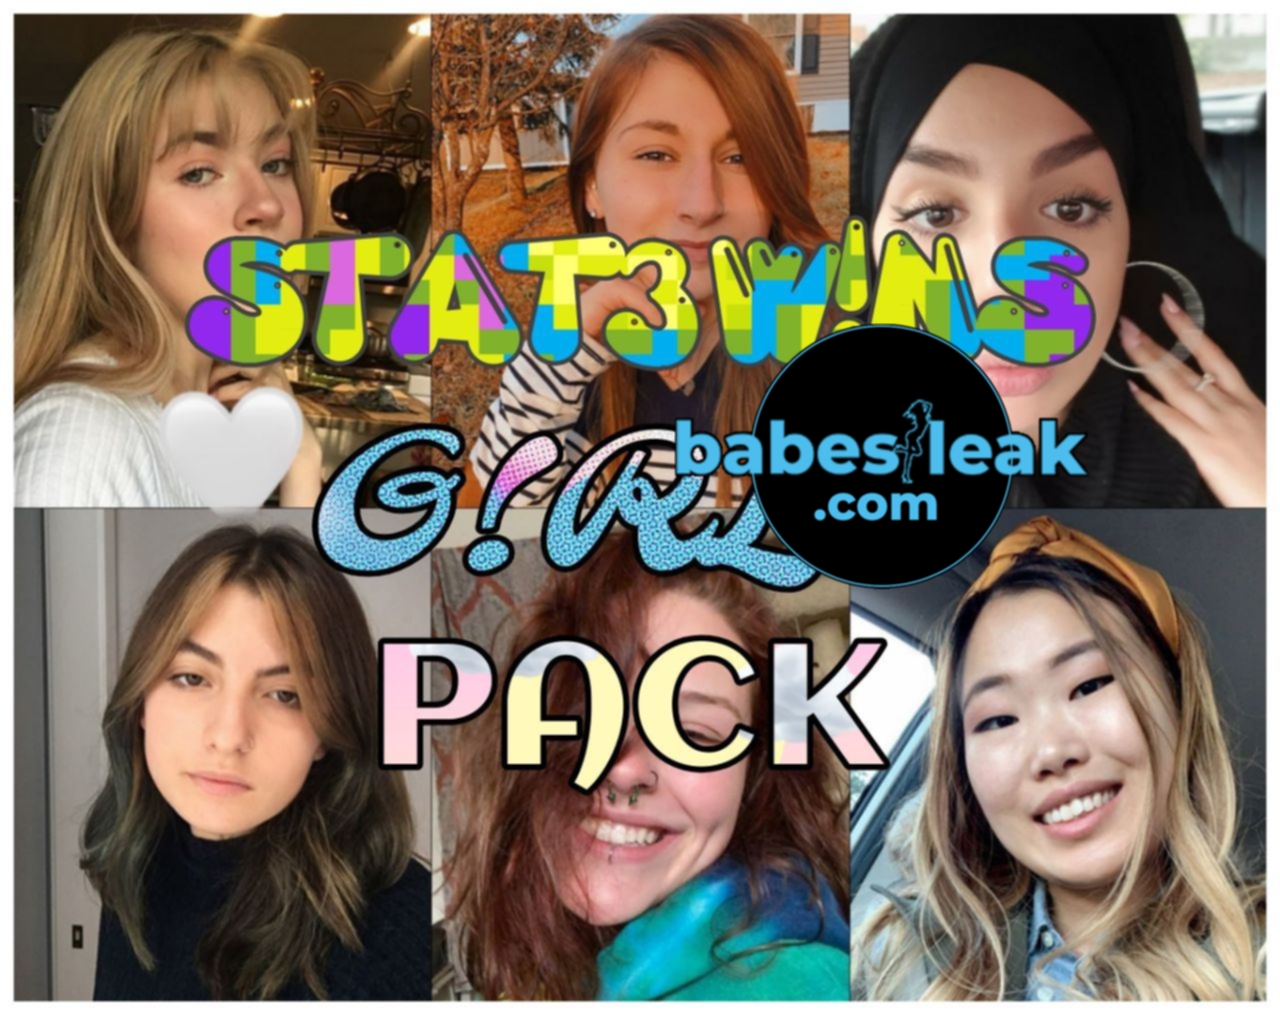 Premium 10 Statewins Girls Pack Stw062 Onlyfans Leaks Snapchat Leaks Statewins Leaks